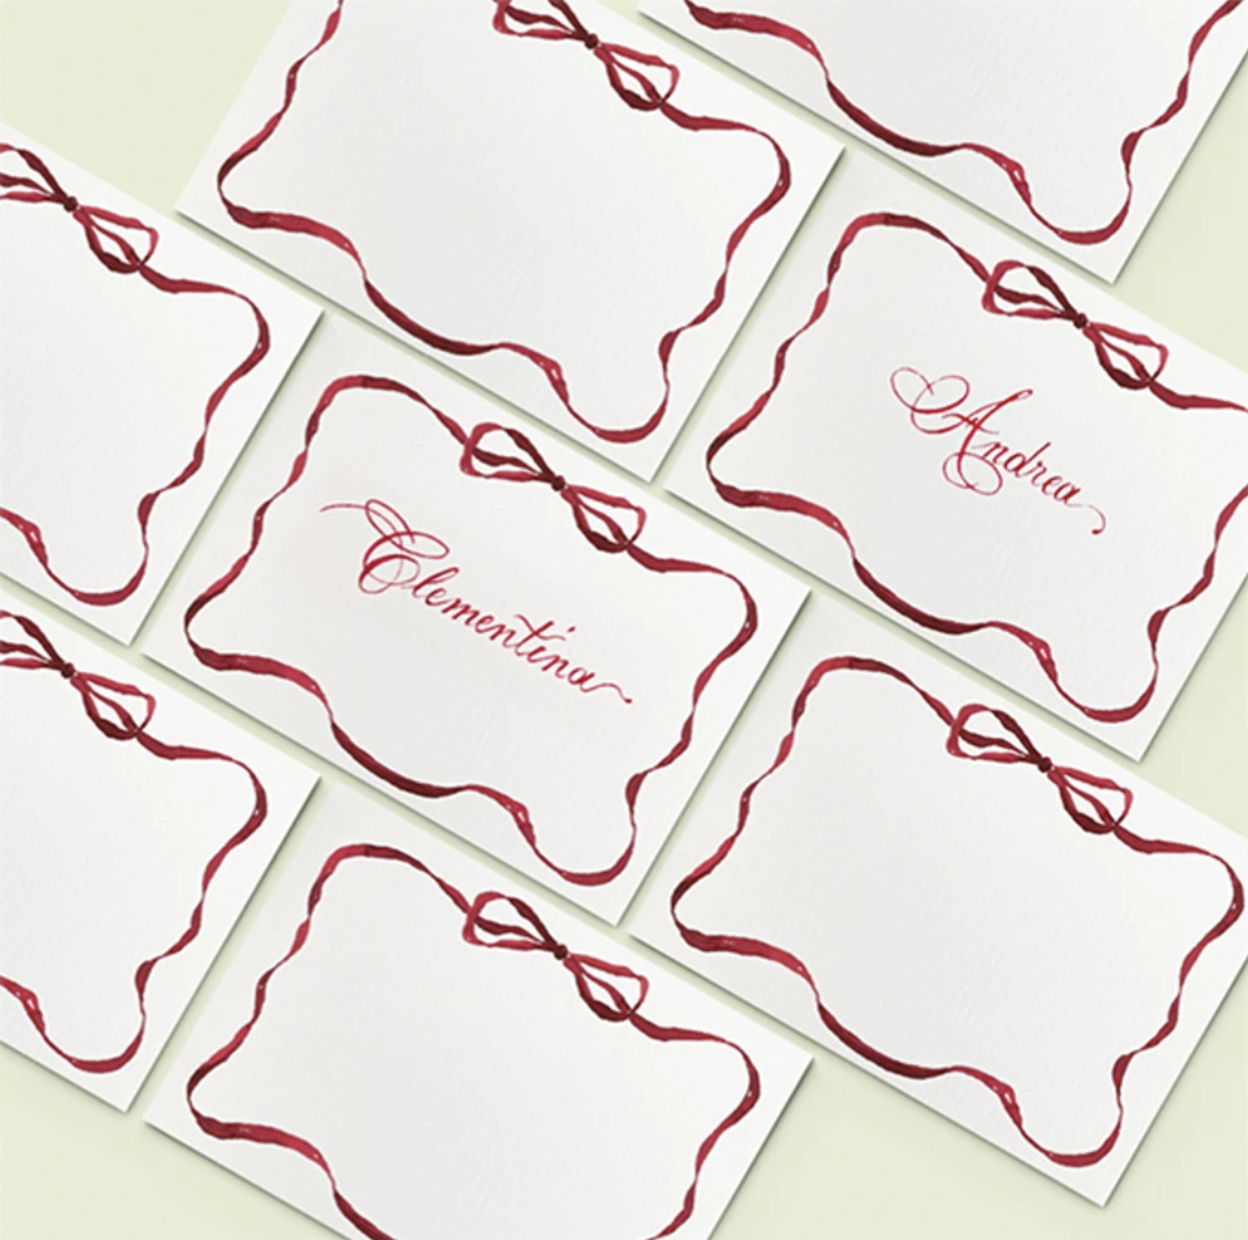 Courtland &amp; Co. HOLIDAY COLLECTION 2021 | FESTIVE RIBBON PLACE CARDS Festive Ribbon Place Cards Printed from Handpainted Design by Clemetina